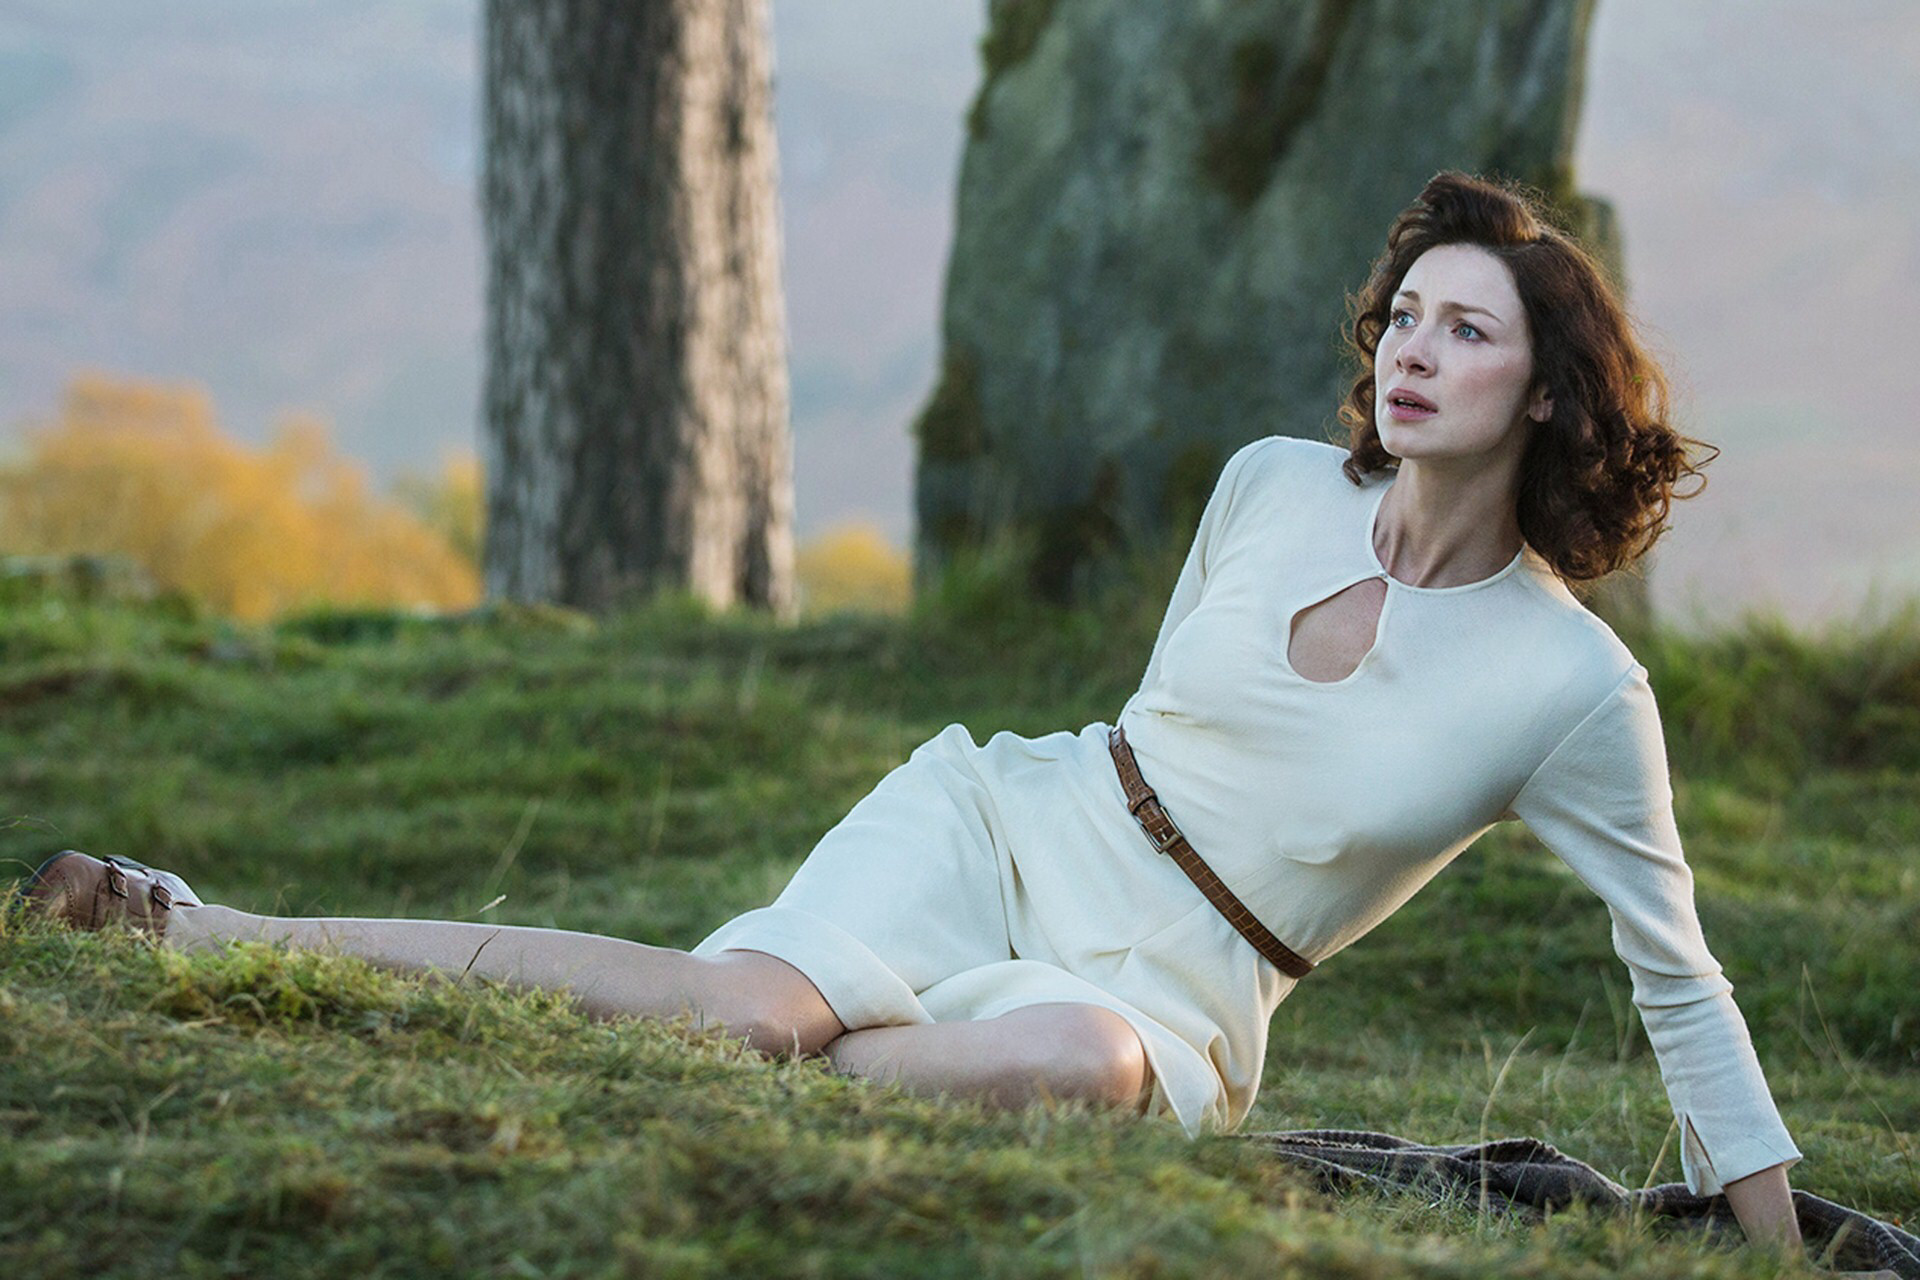 1920x1280 Outlander - Caitriona Balfe As Claire Randall Wallpaper. This is the dress  i'd really like a reproduction of.